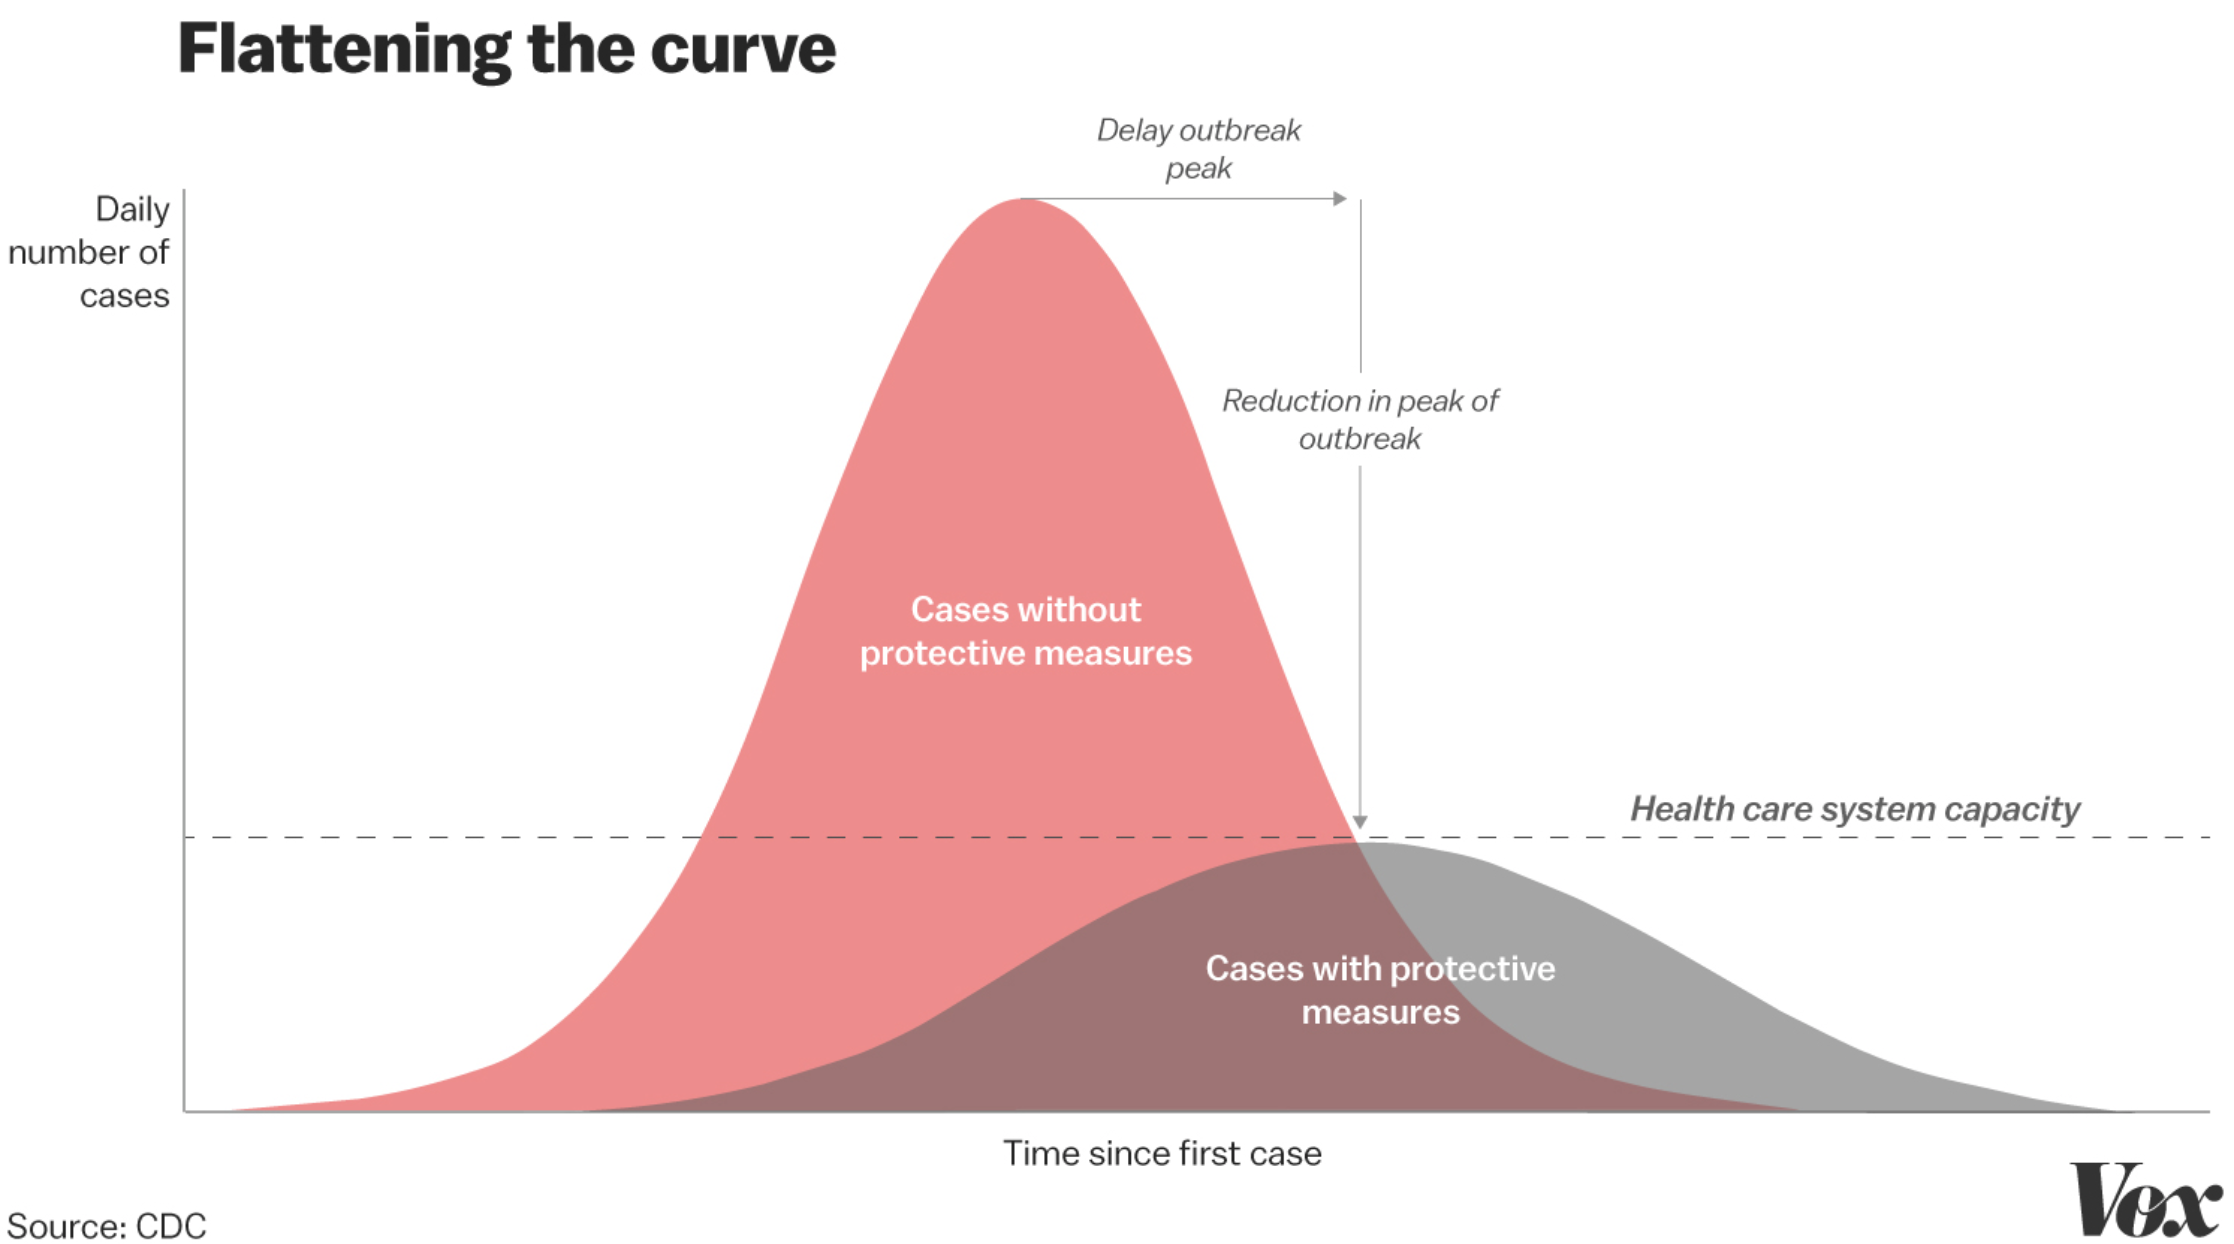 Flattening the curve of an epidemic means slowing the rate of spread to keep it within the capacity of the health care system.